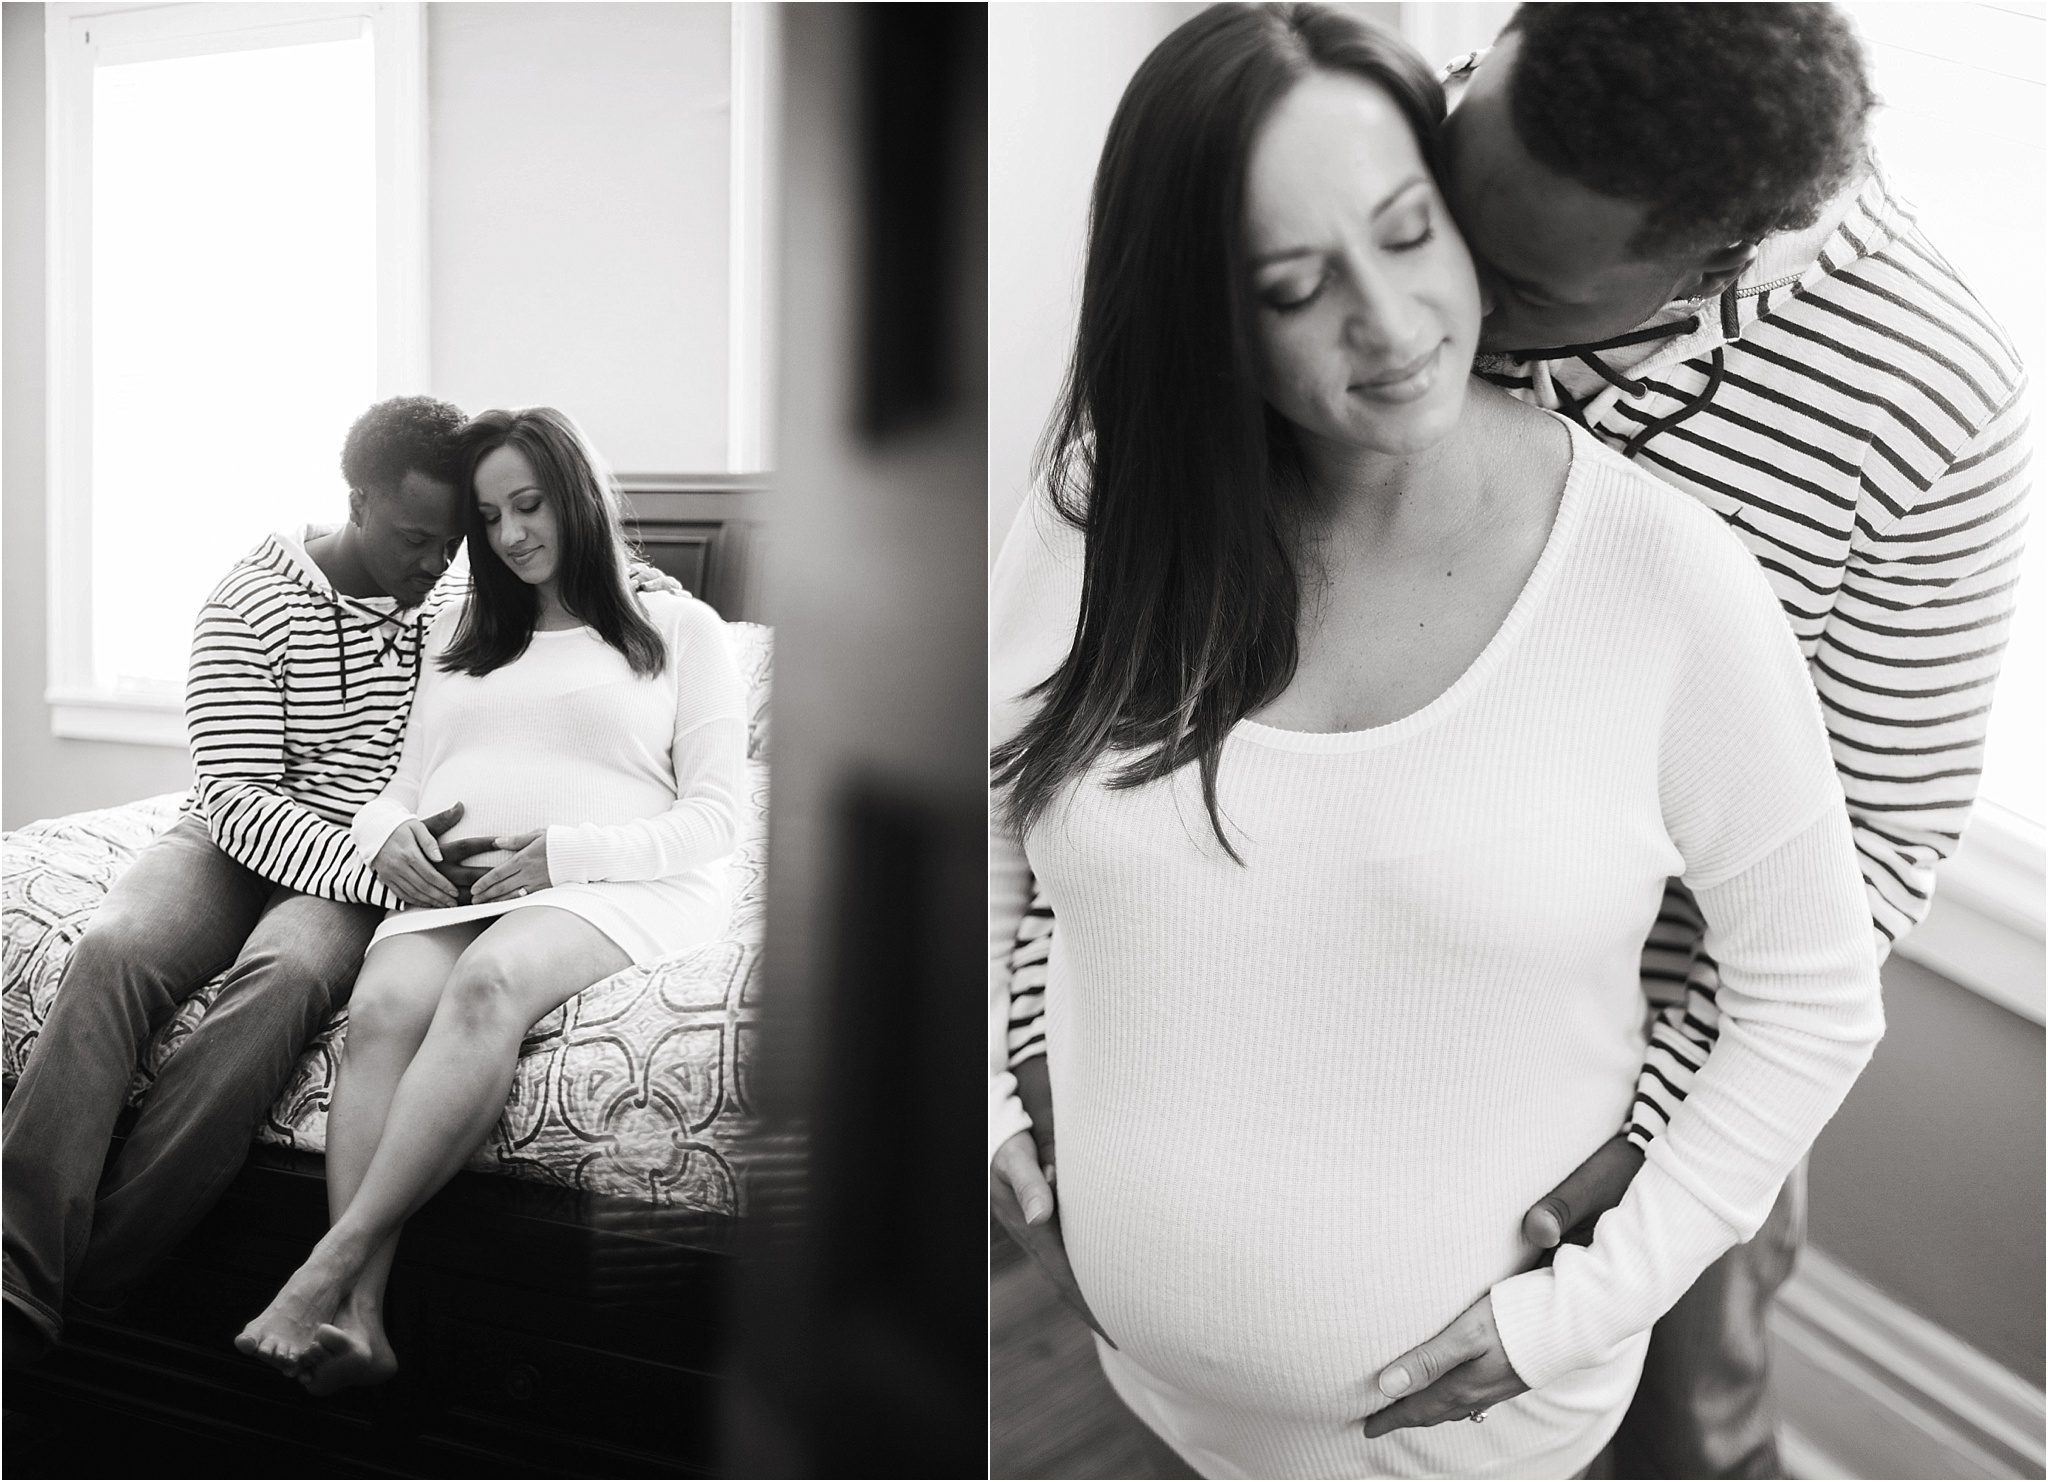 View More: http://michellepoppphotography.pass.us/lona-maternity